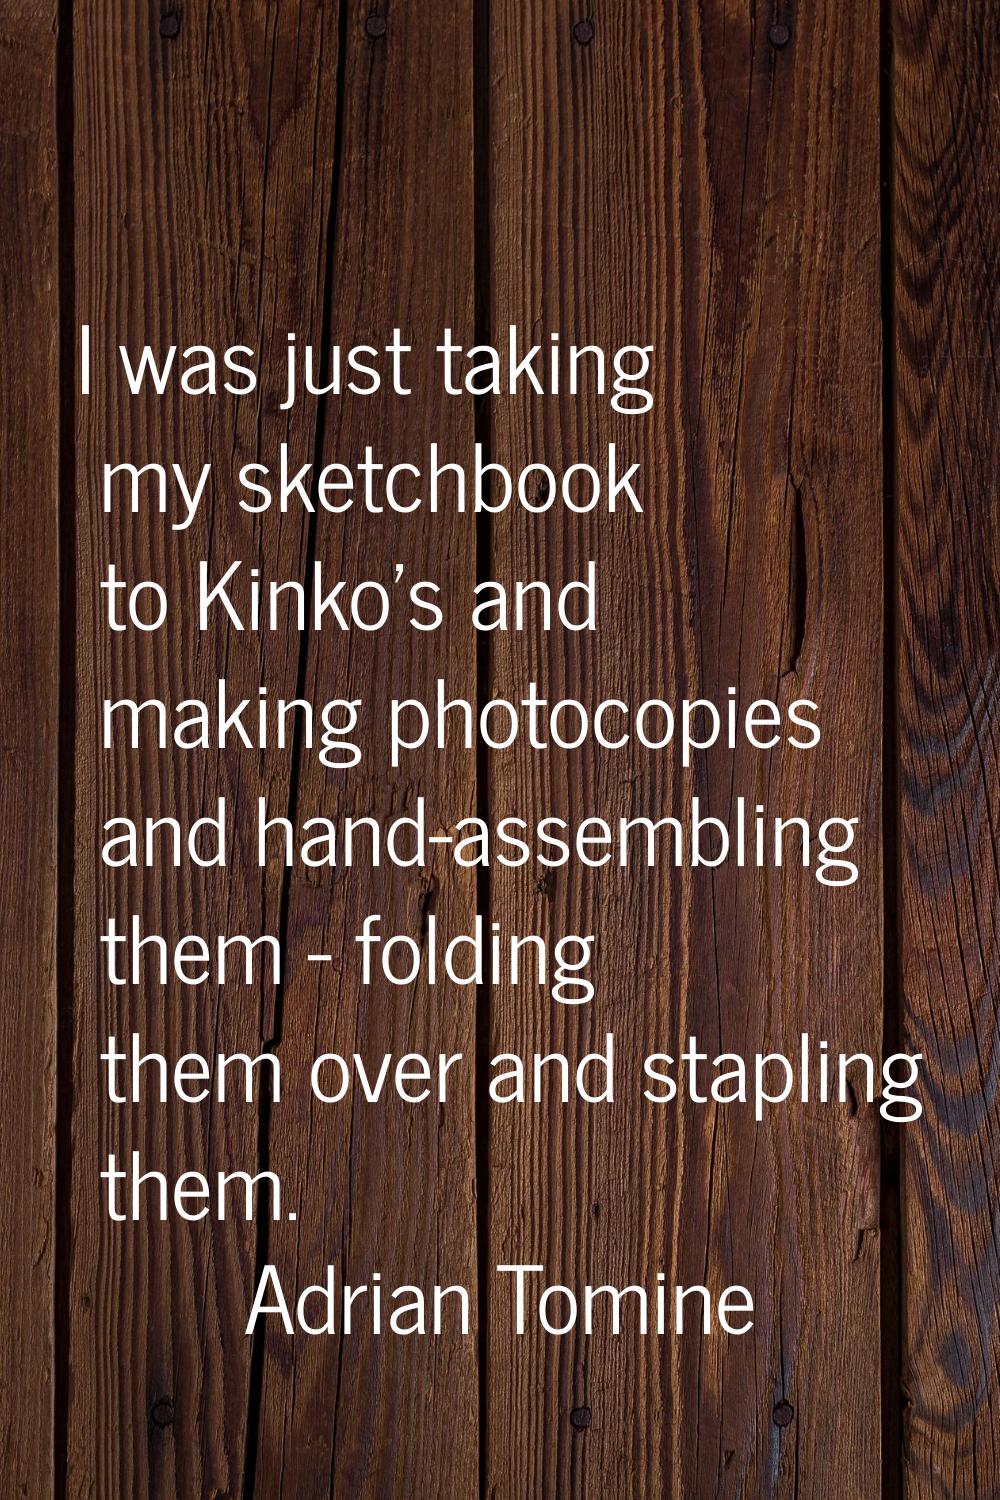 I was just taking my sketchbook to Kinko's and making photocopies and hand-assembling them - foldin